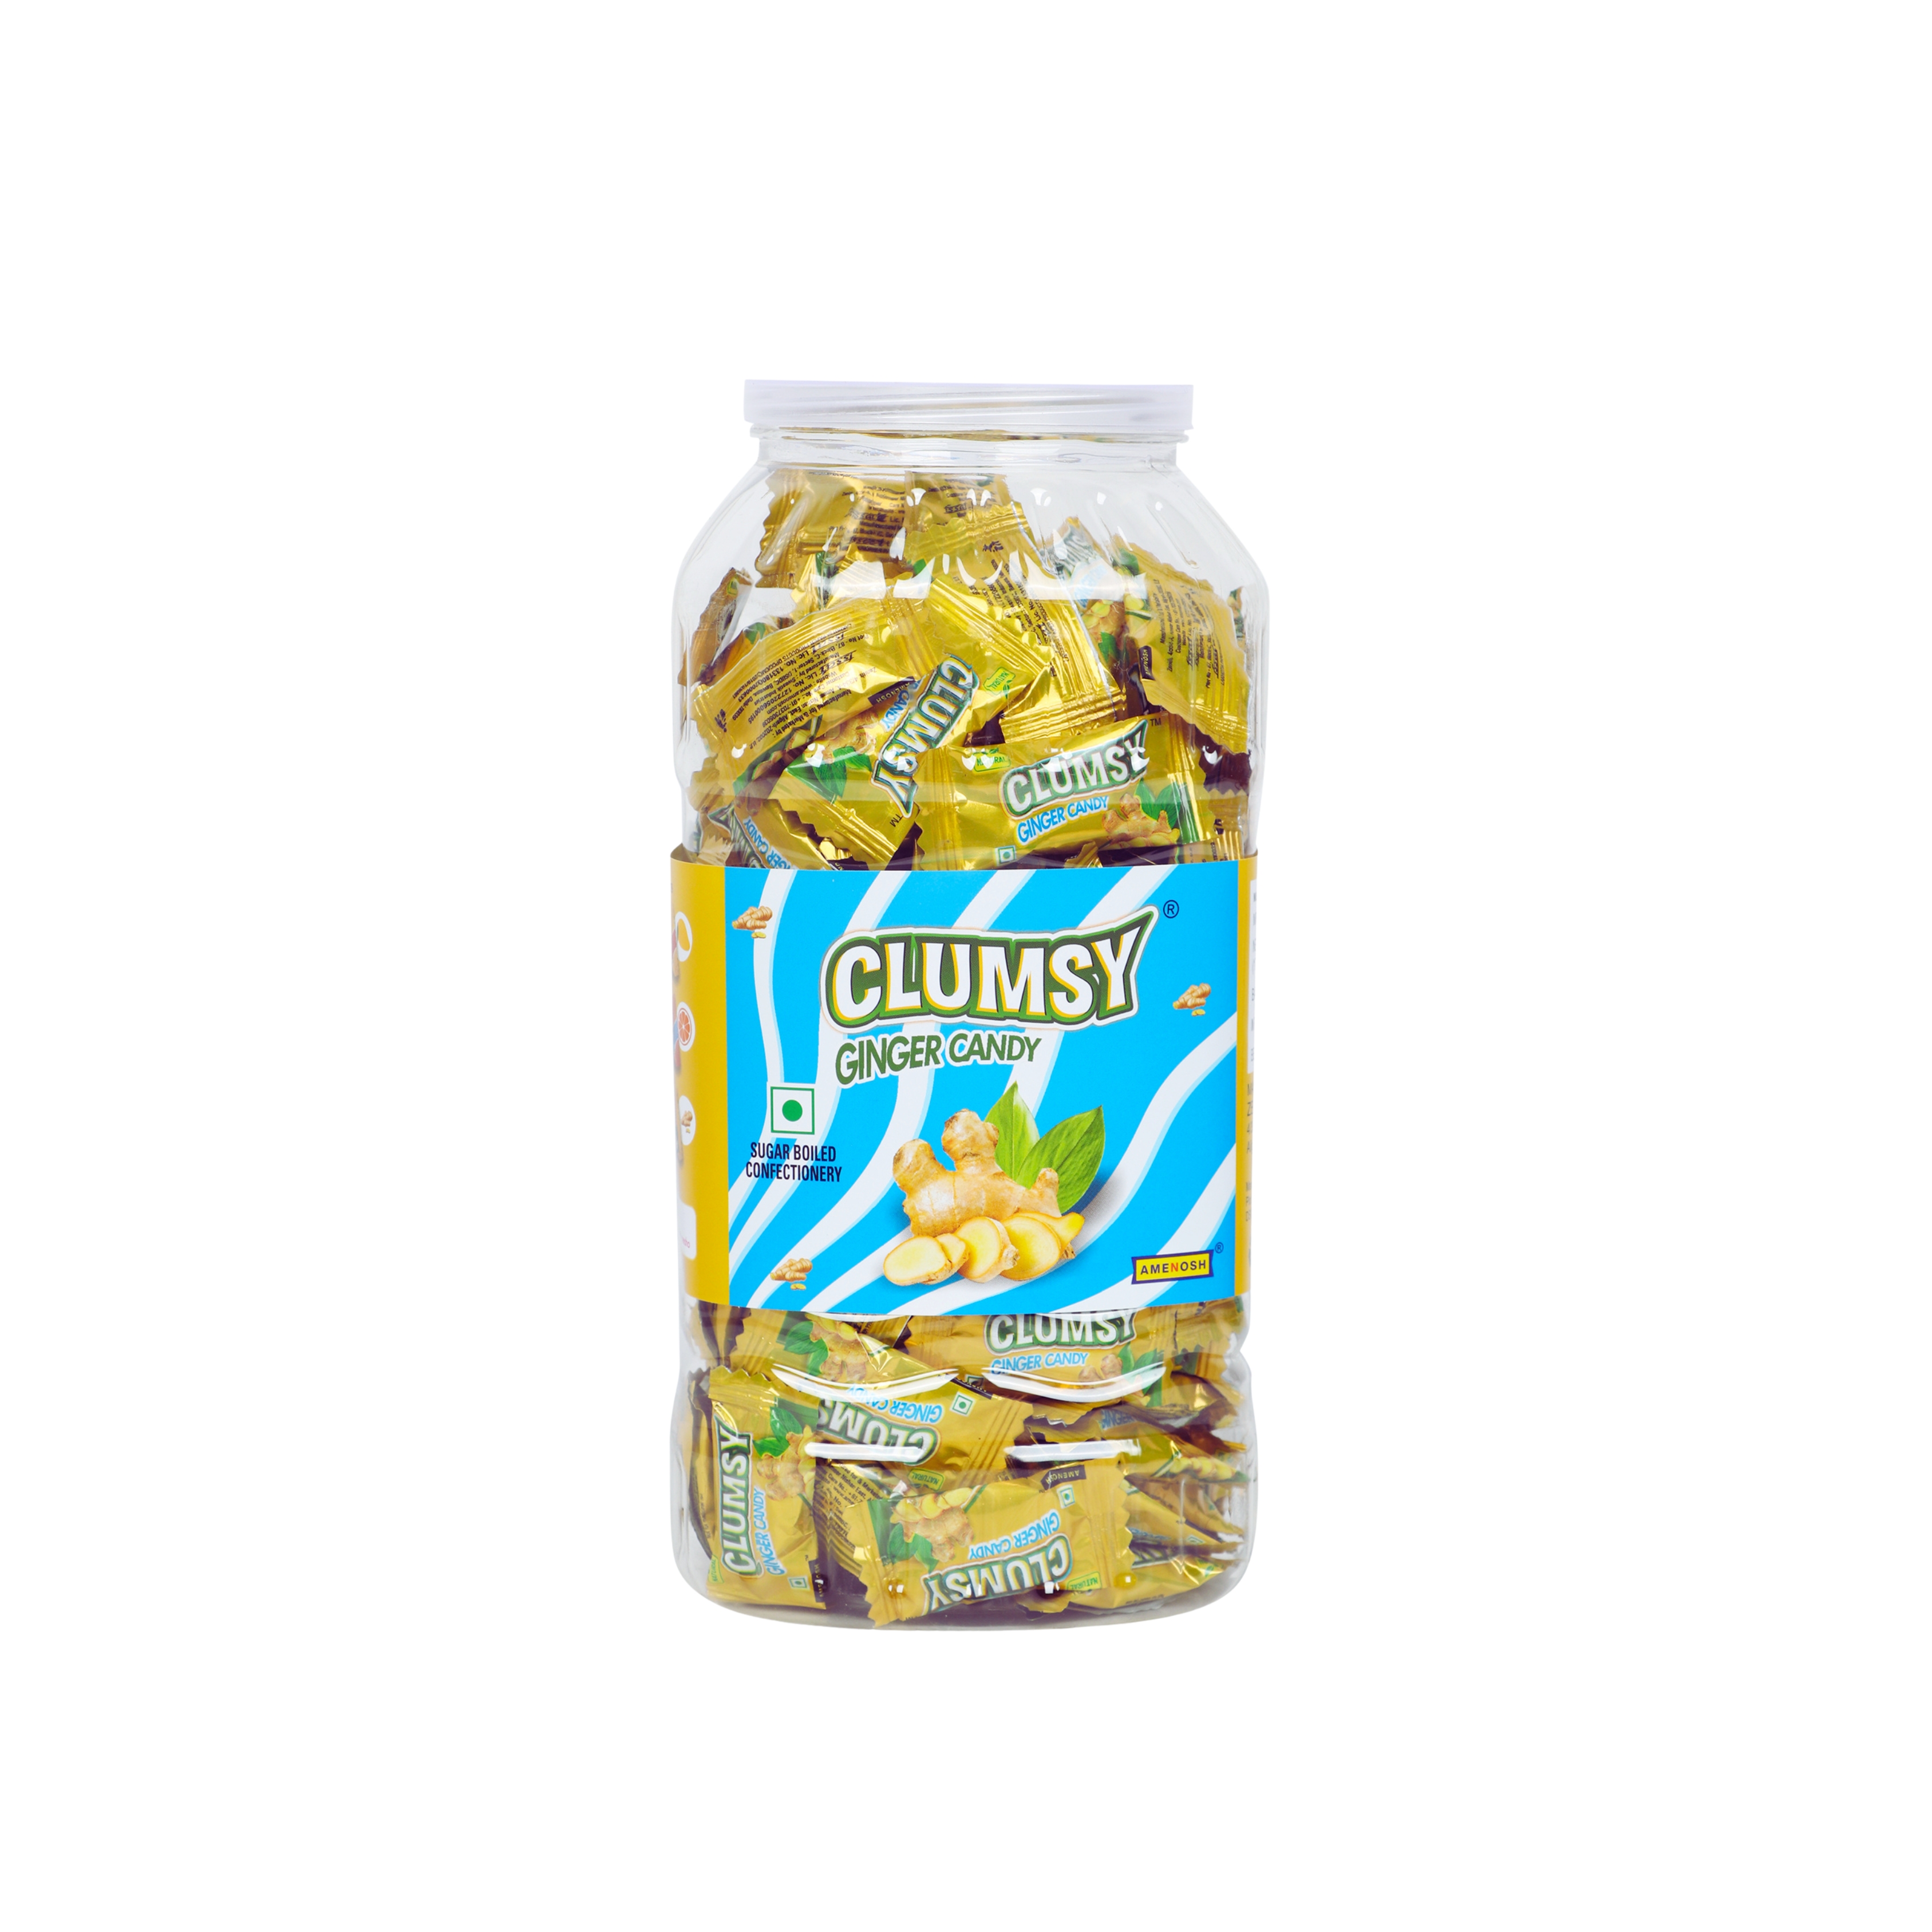 Clumsy Ginger candy Jar, 170 candy units